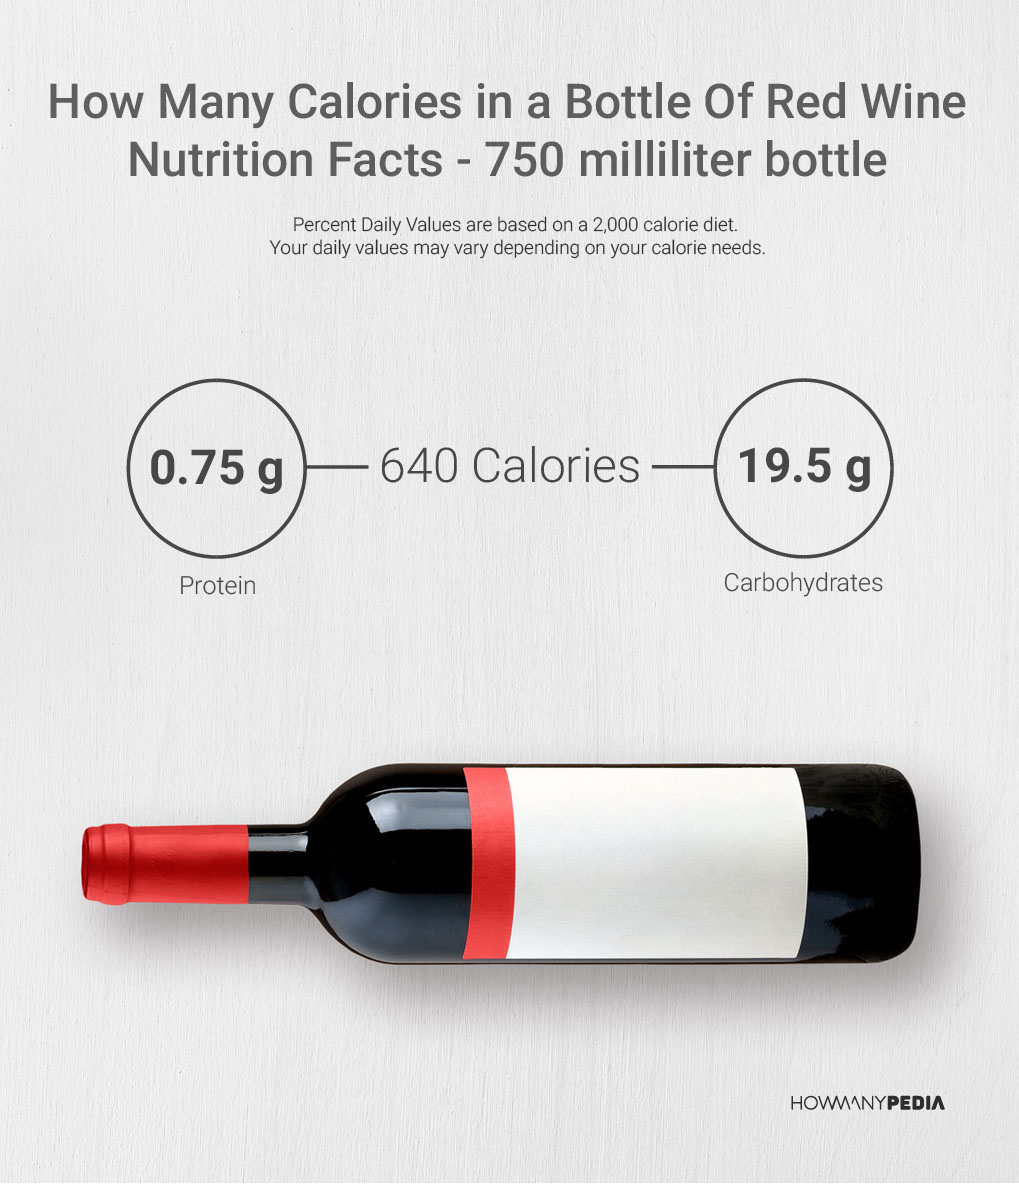 How Many Calories in a Bottle of Red Wine